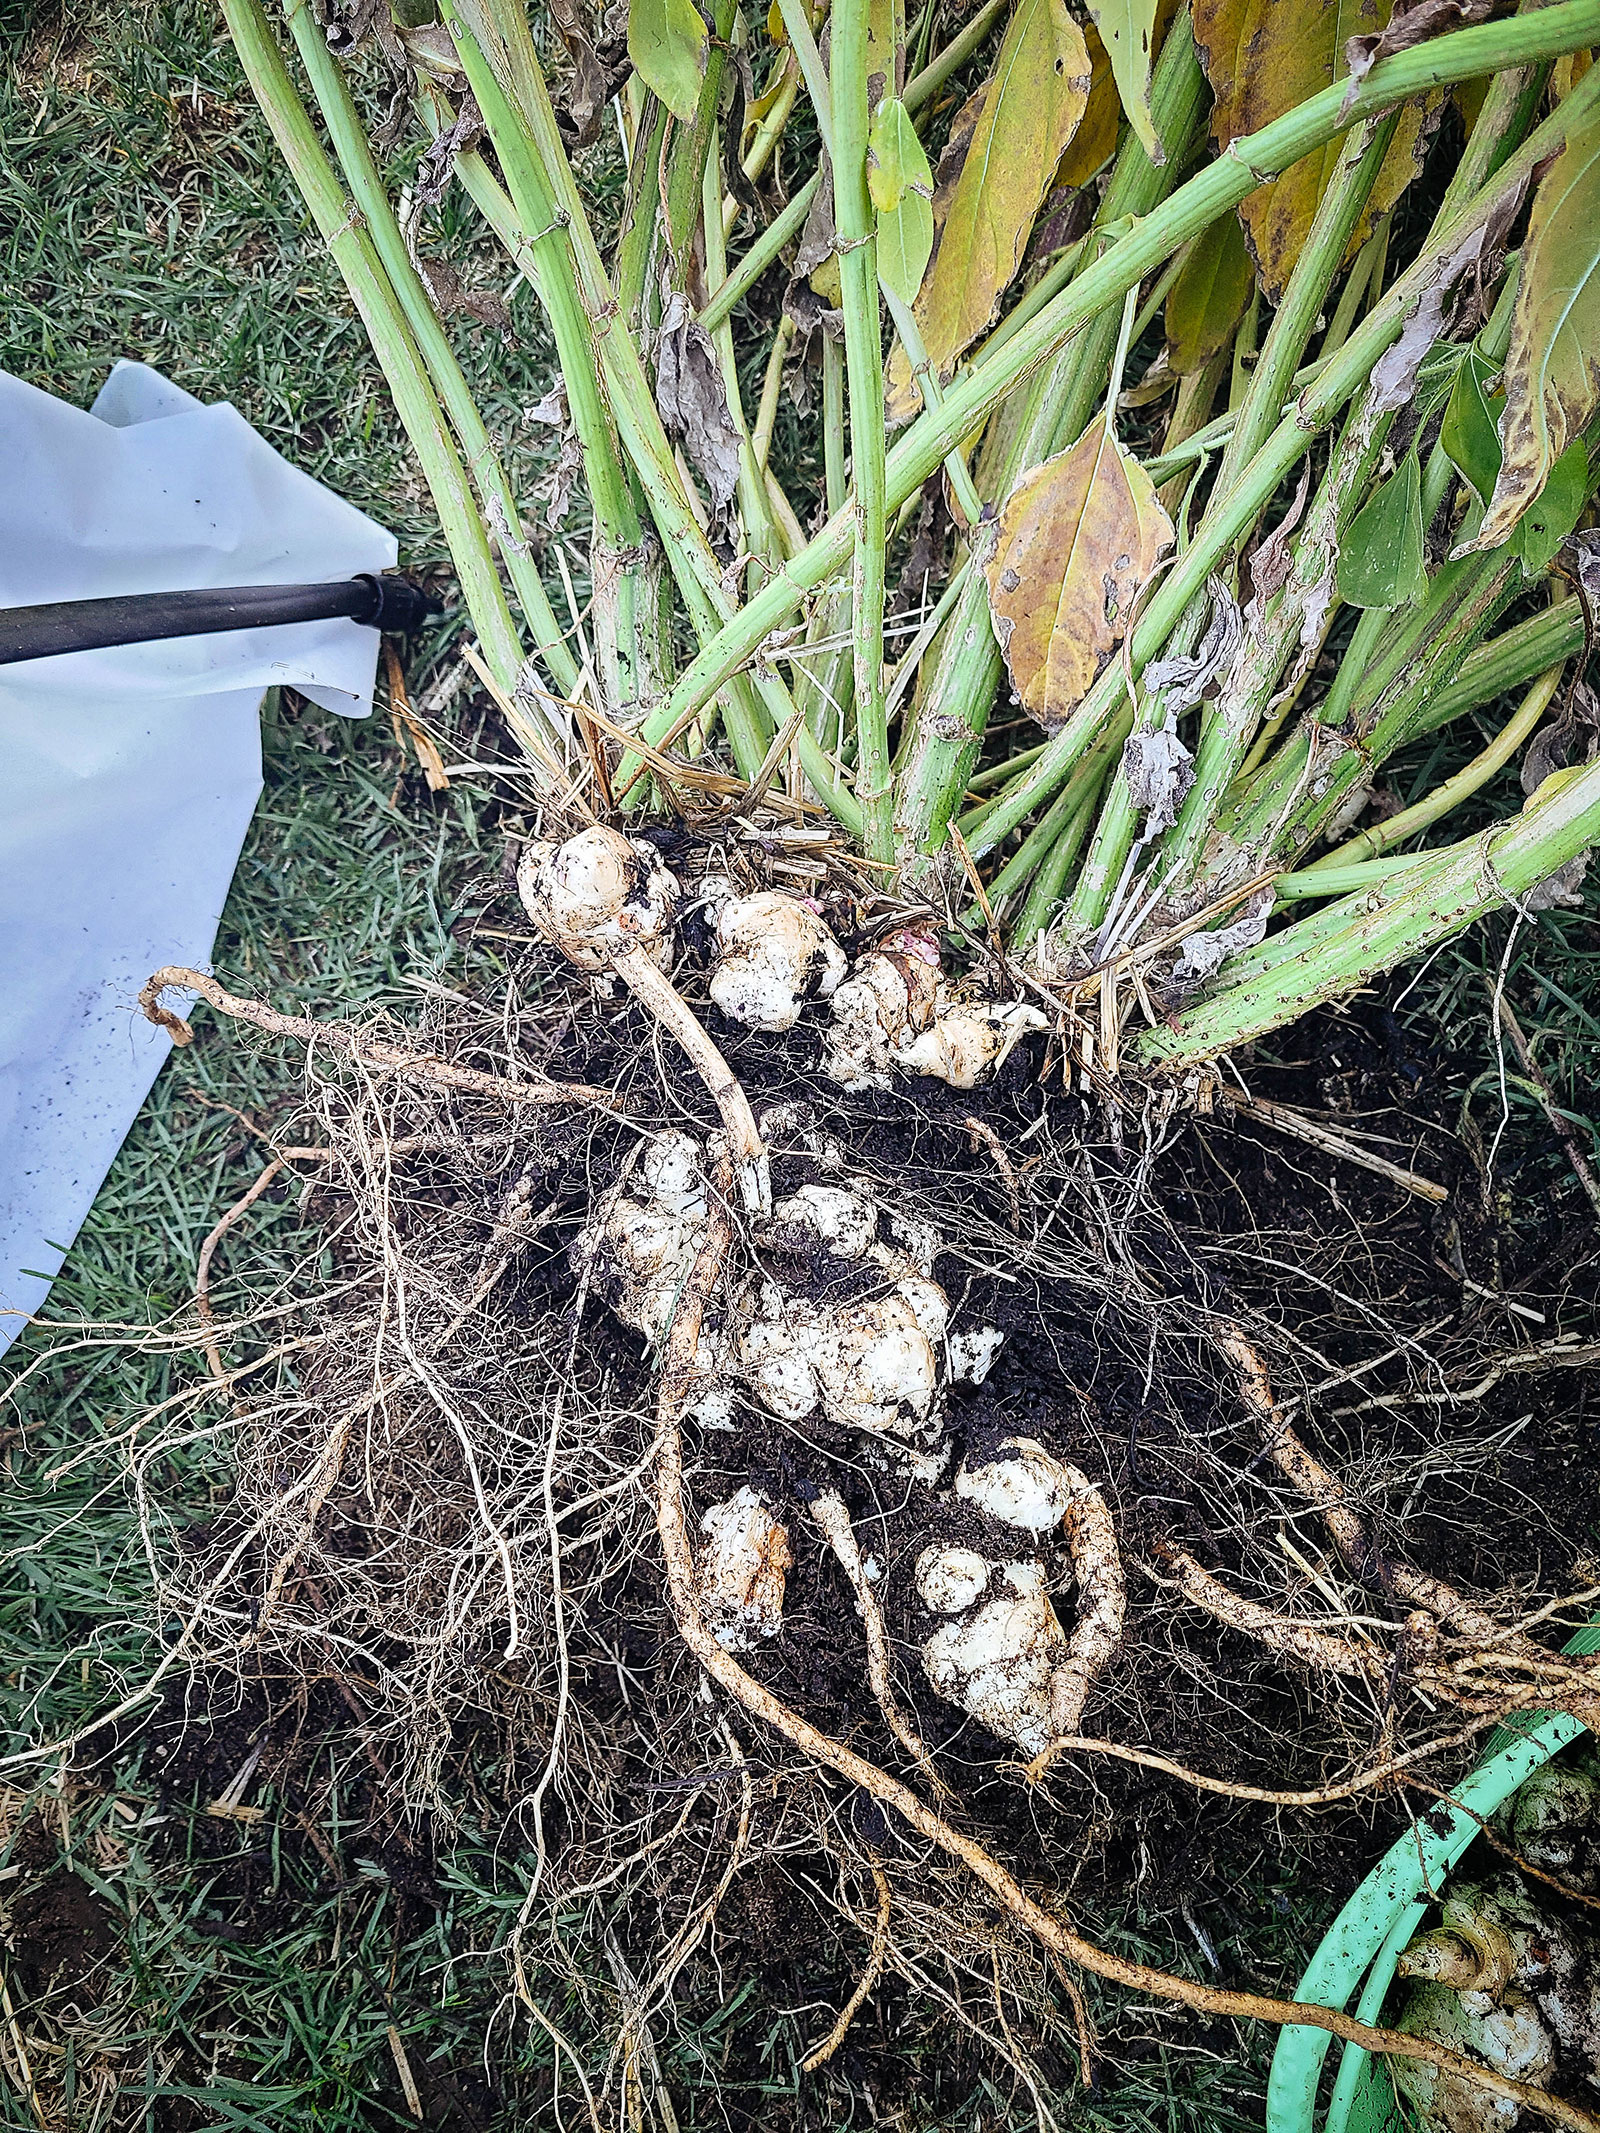 A newly harvested cluster of sunchoke tubers growing on short stolons